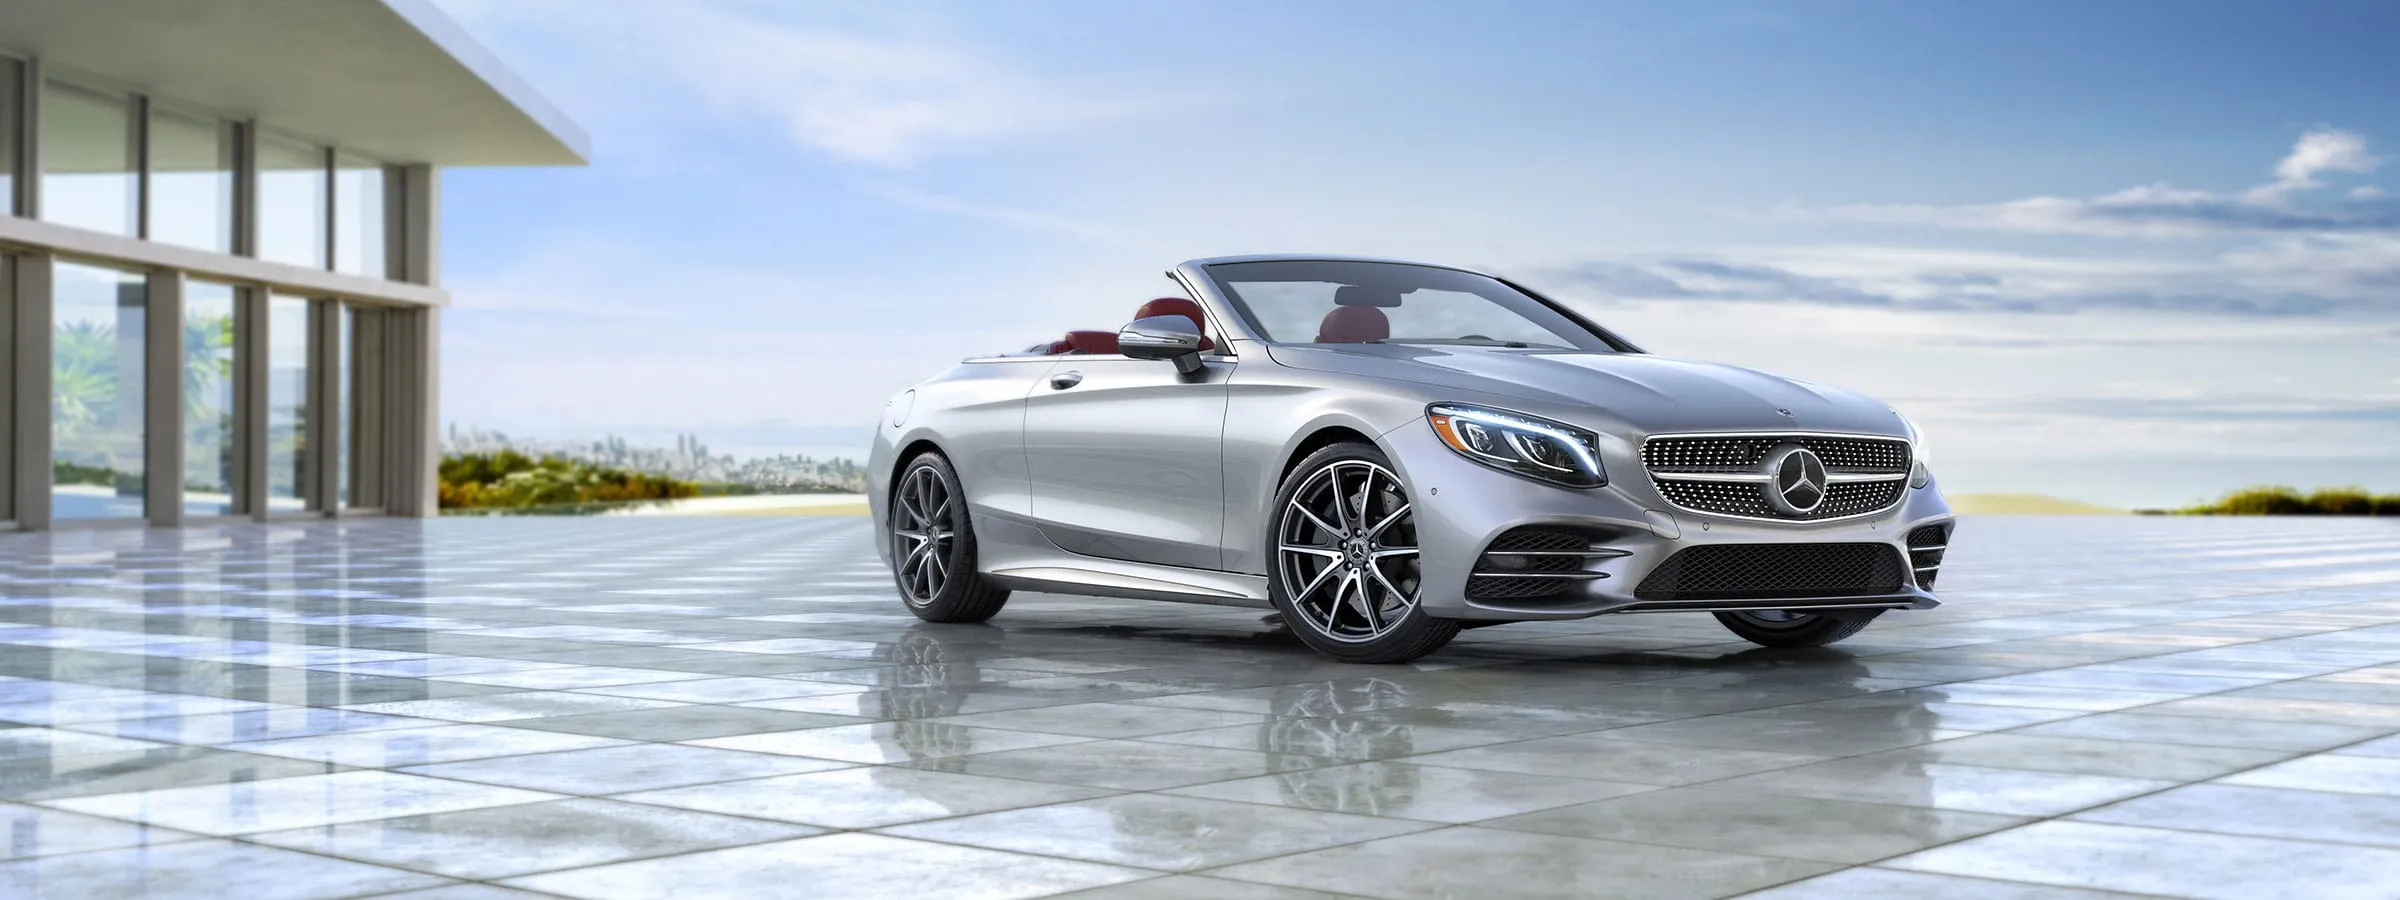 S Class Cabriolet S 560 Amg S 63 Amg S 65 Mercedes Benz